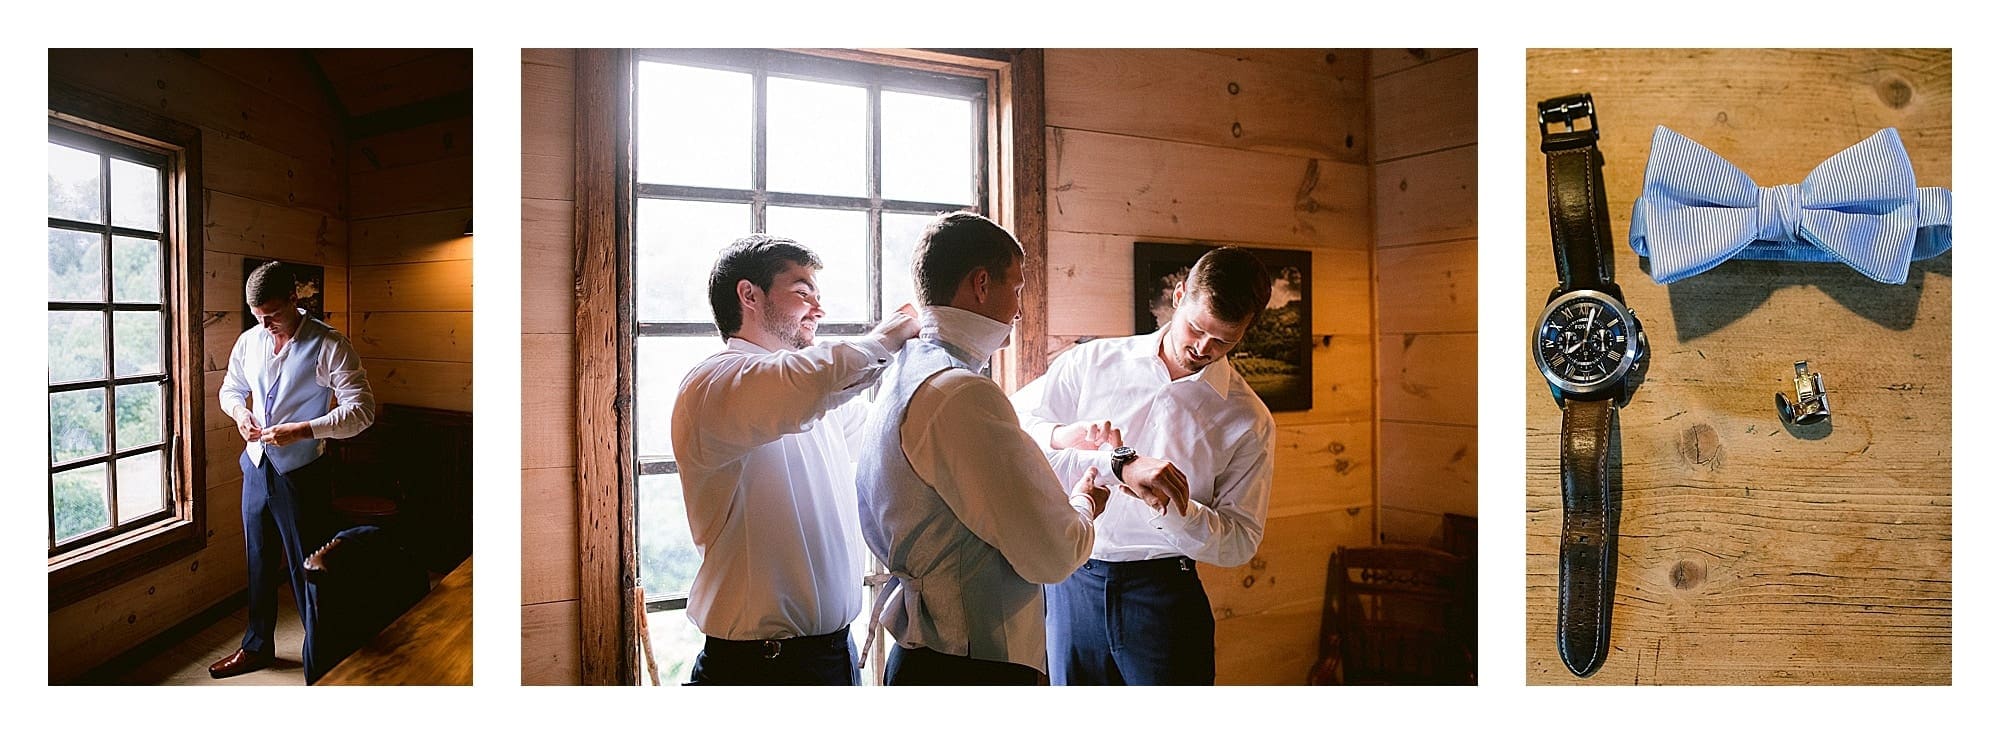 Groom getting ready buttoning up suit in wooden cabin room